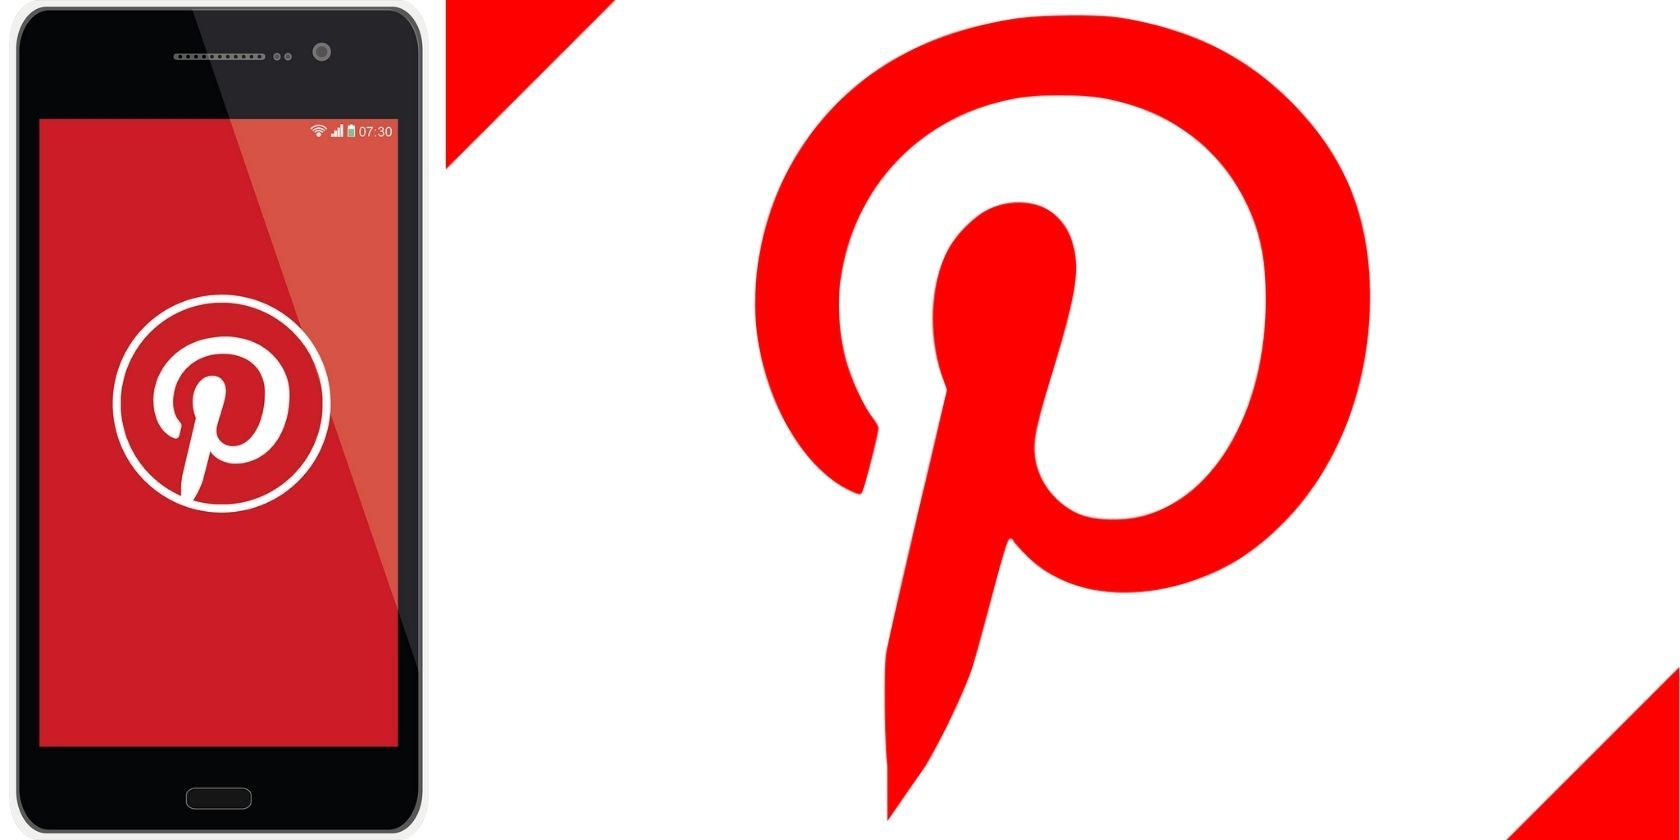 Mock-up image of Pinterest app on a phone with the Pinterest vector logo